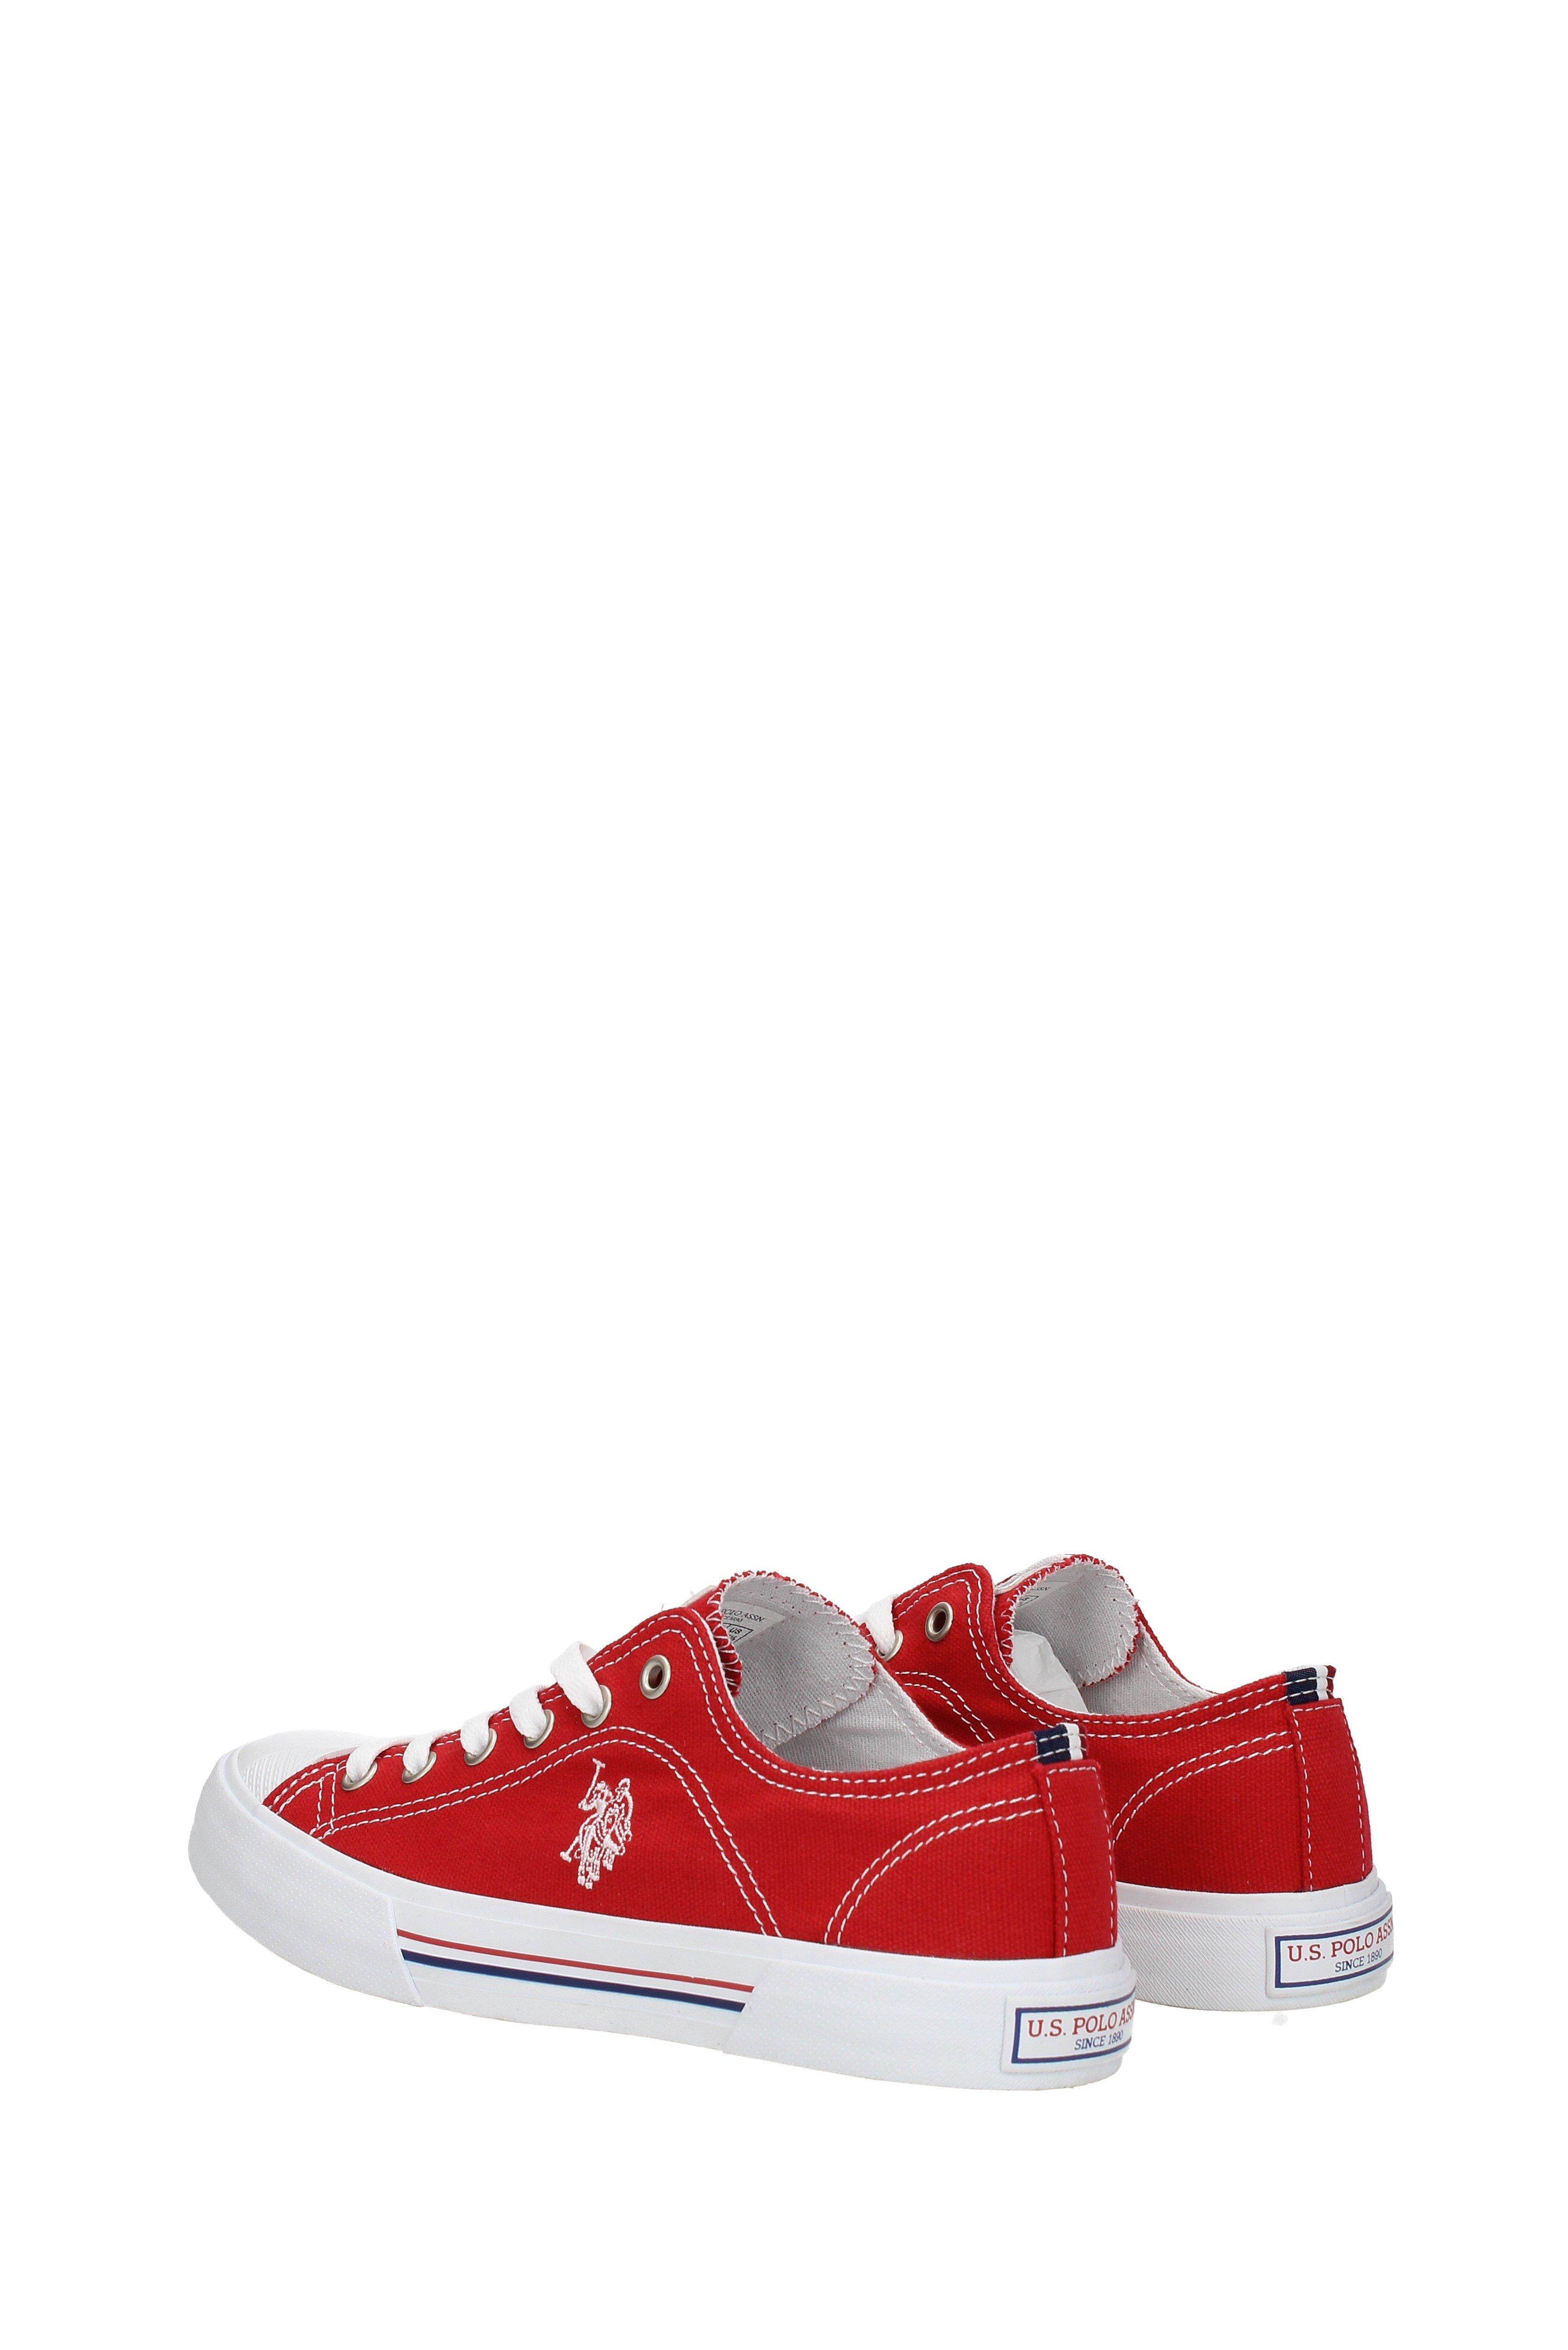 U.S. POLO ASSN. Sneakers Rory in Red - Lyst